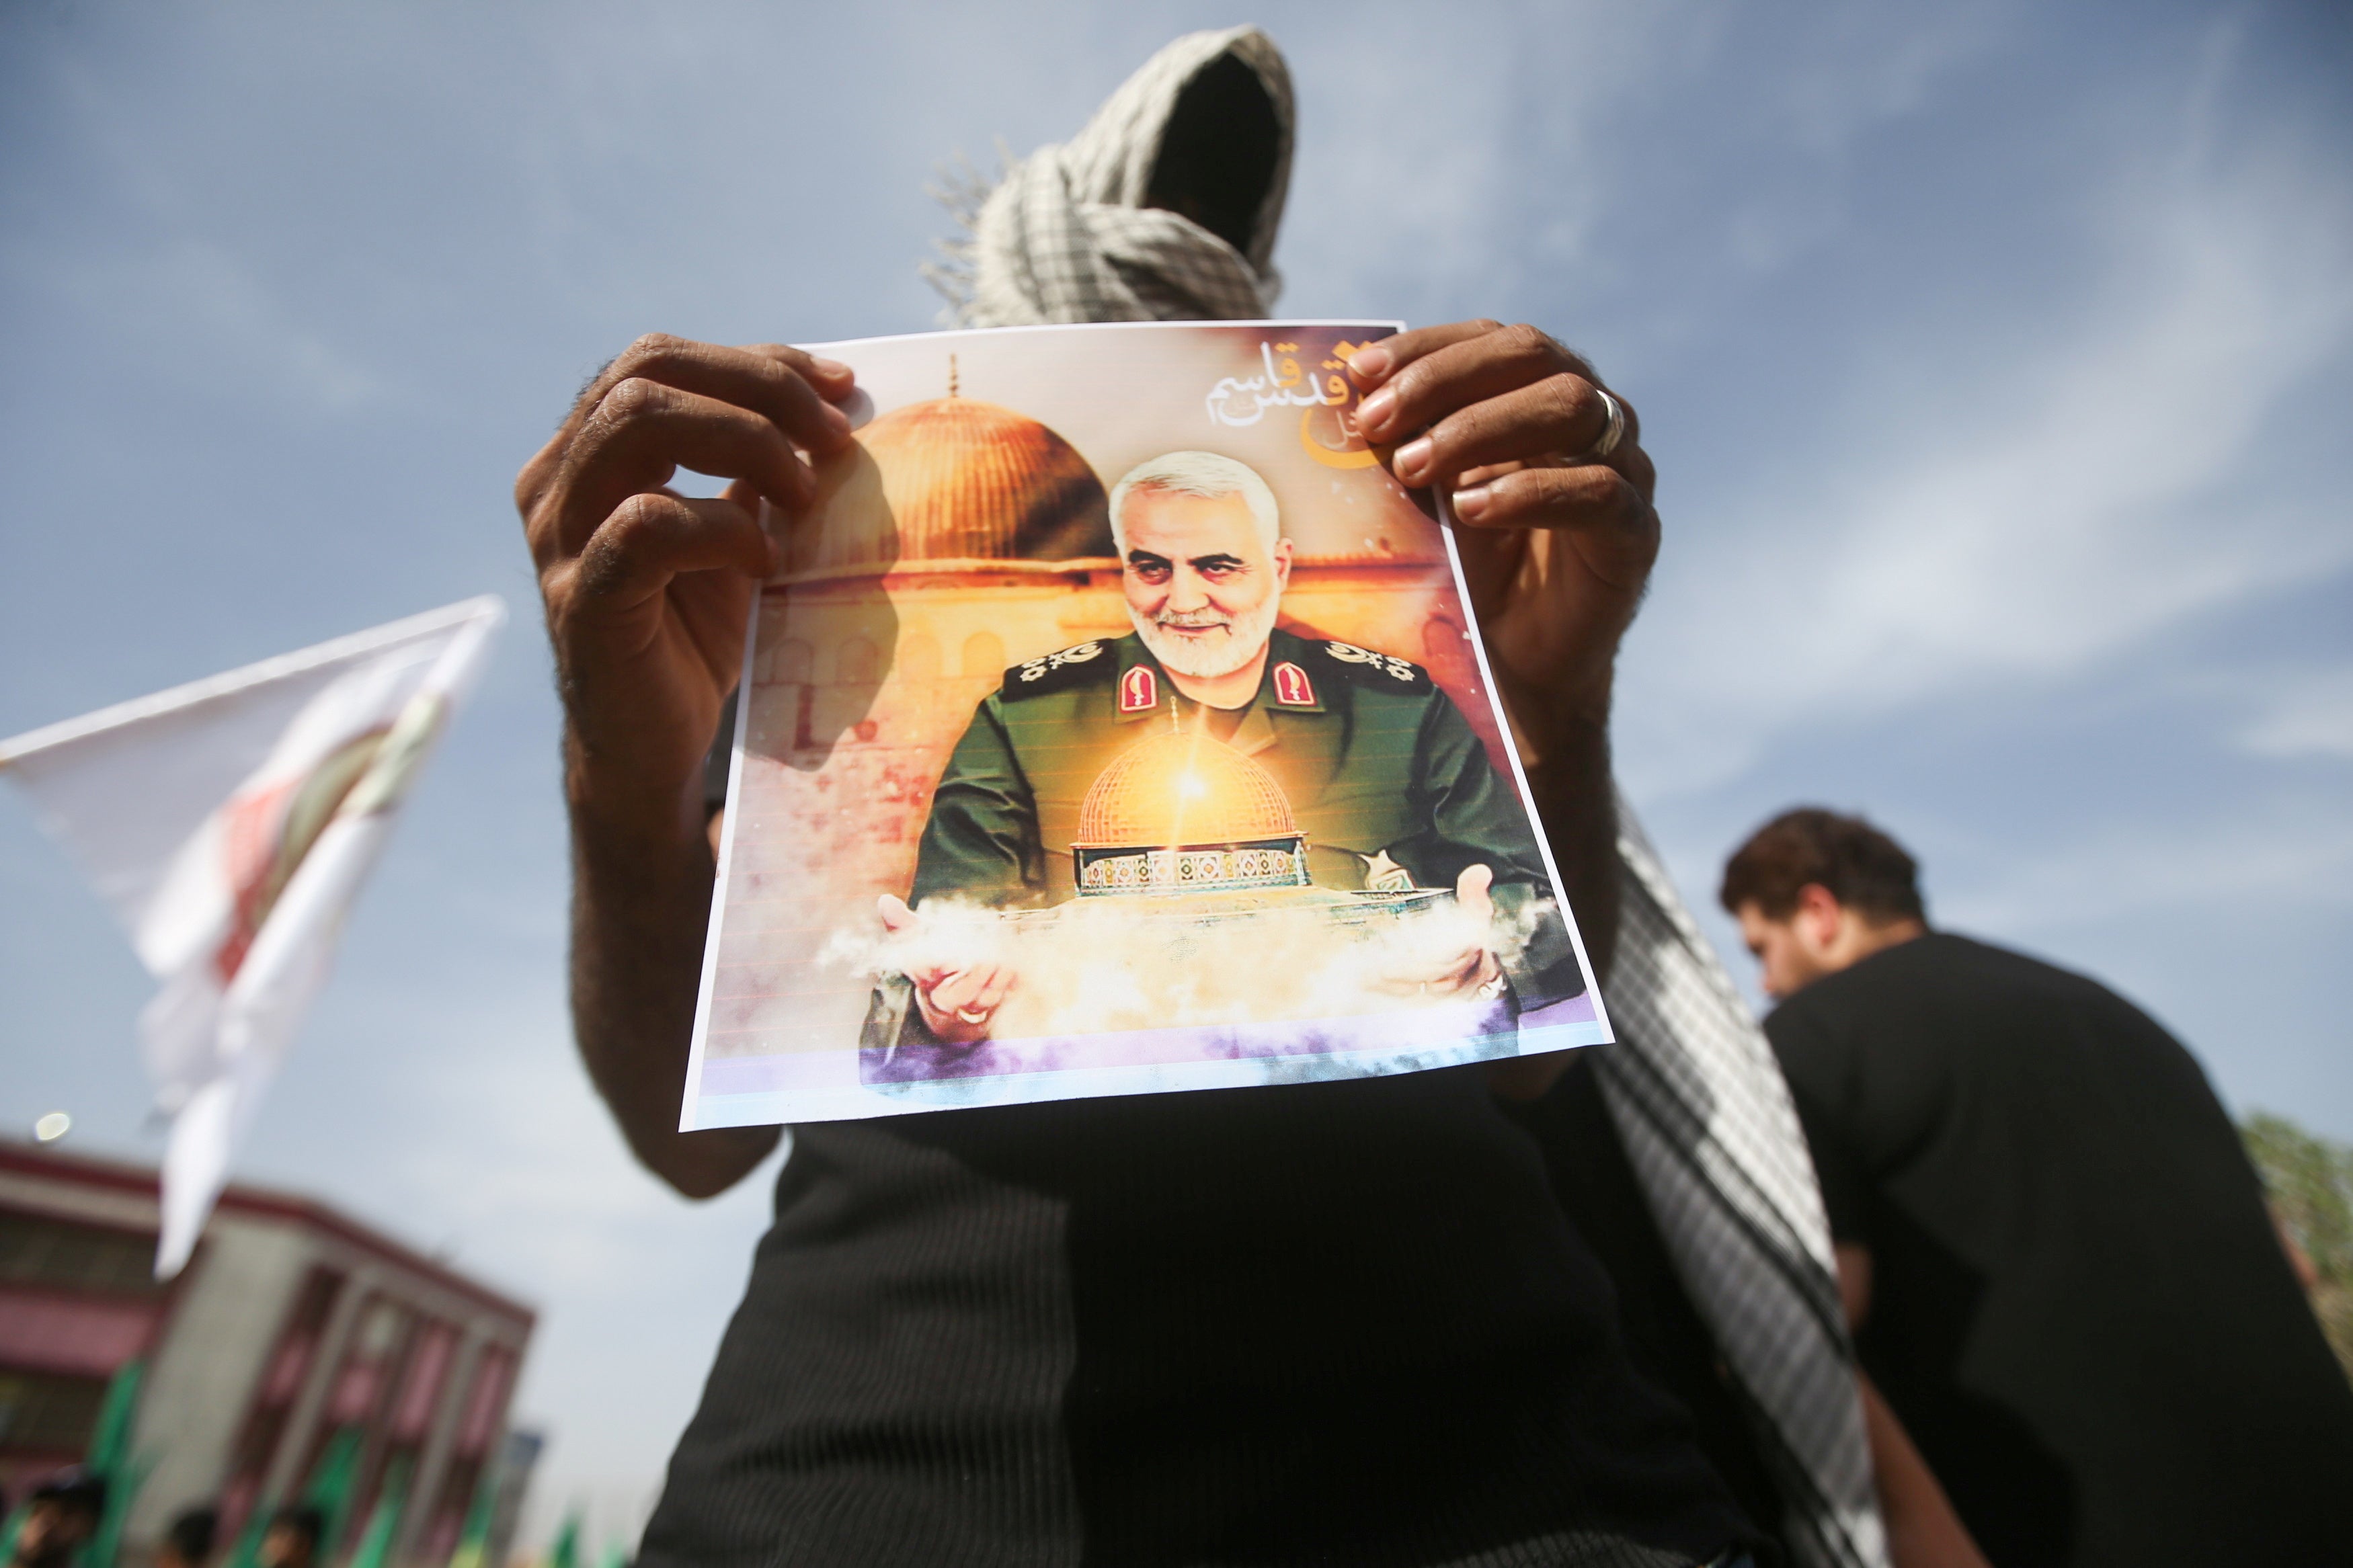 A militia member shows a picture of Qassem Soleimani, whose death has inflamed tensions